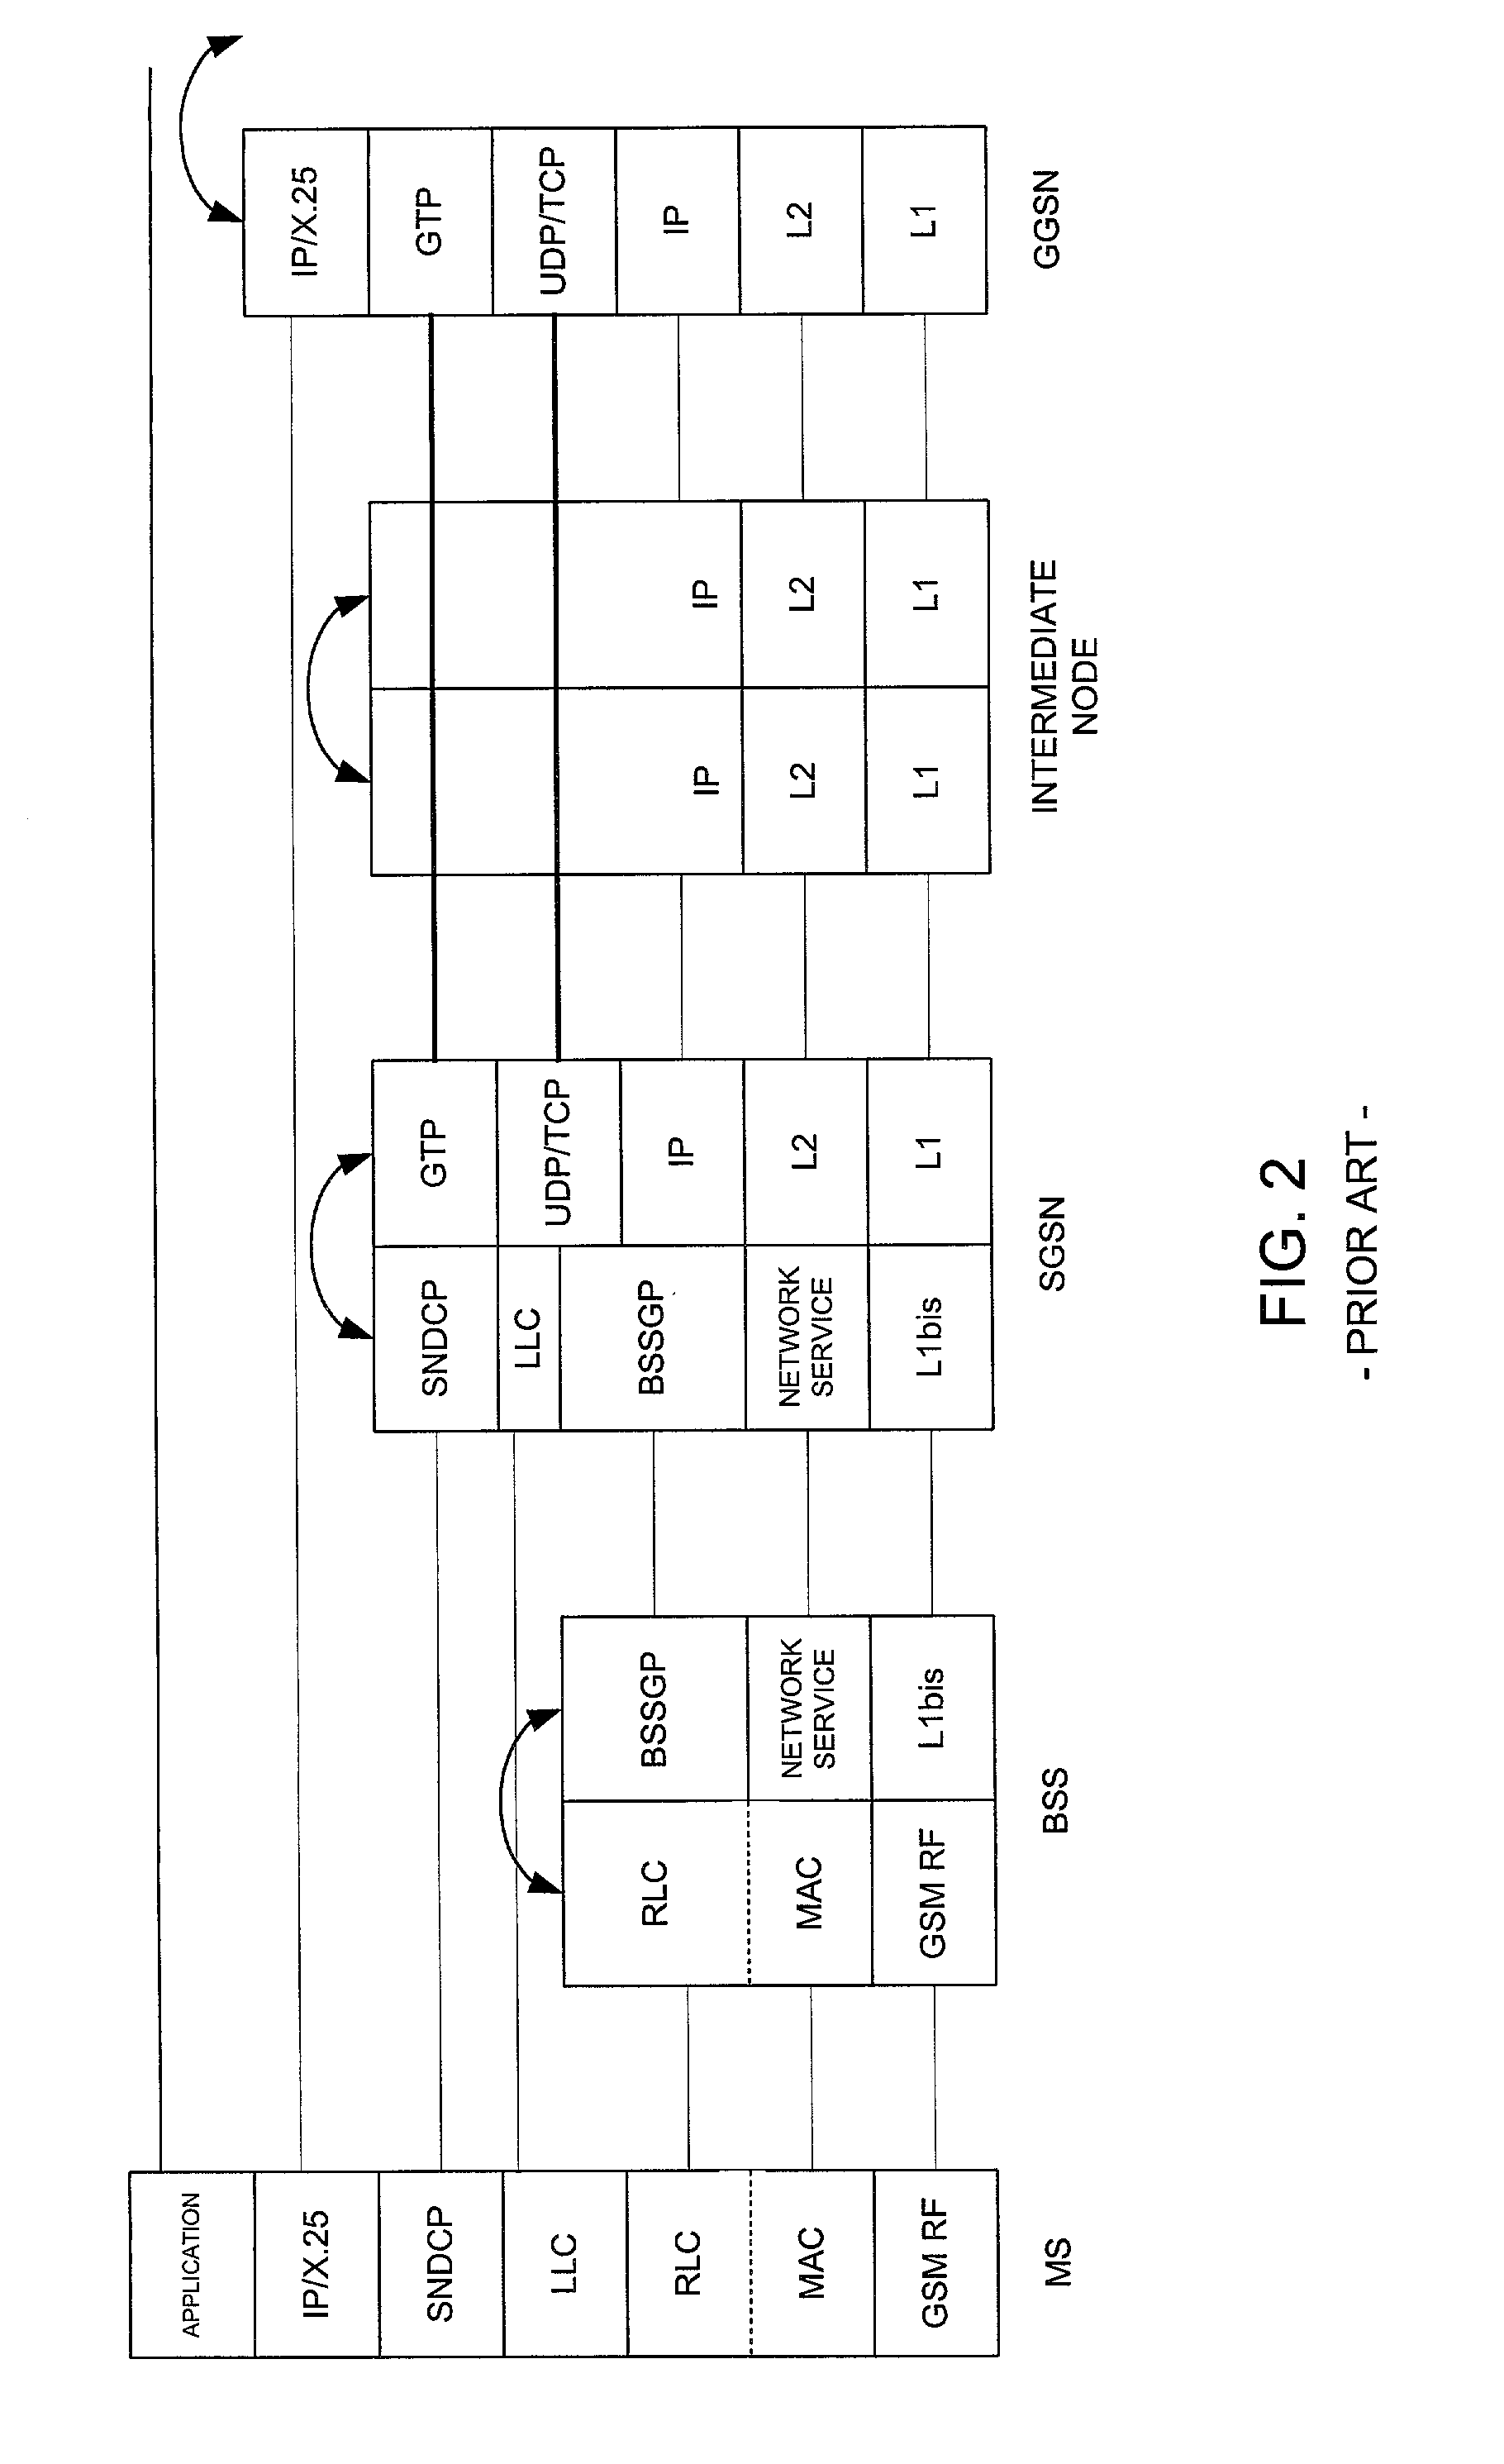 Method and apparatus for communicating data in a GPRS network based on a plurality of traffic classes